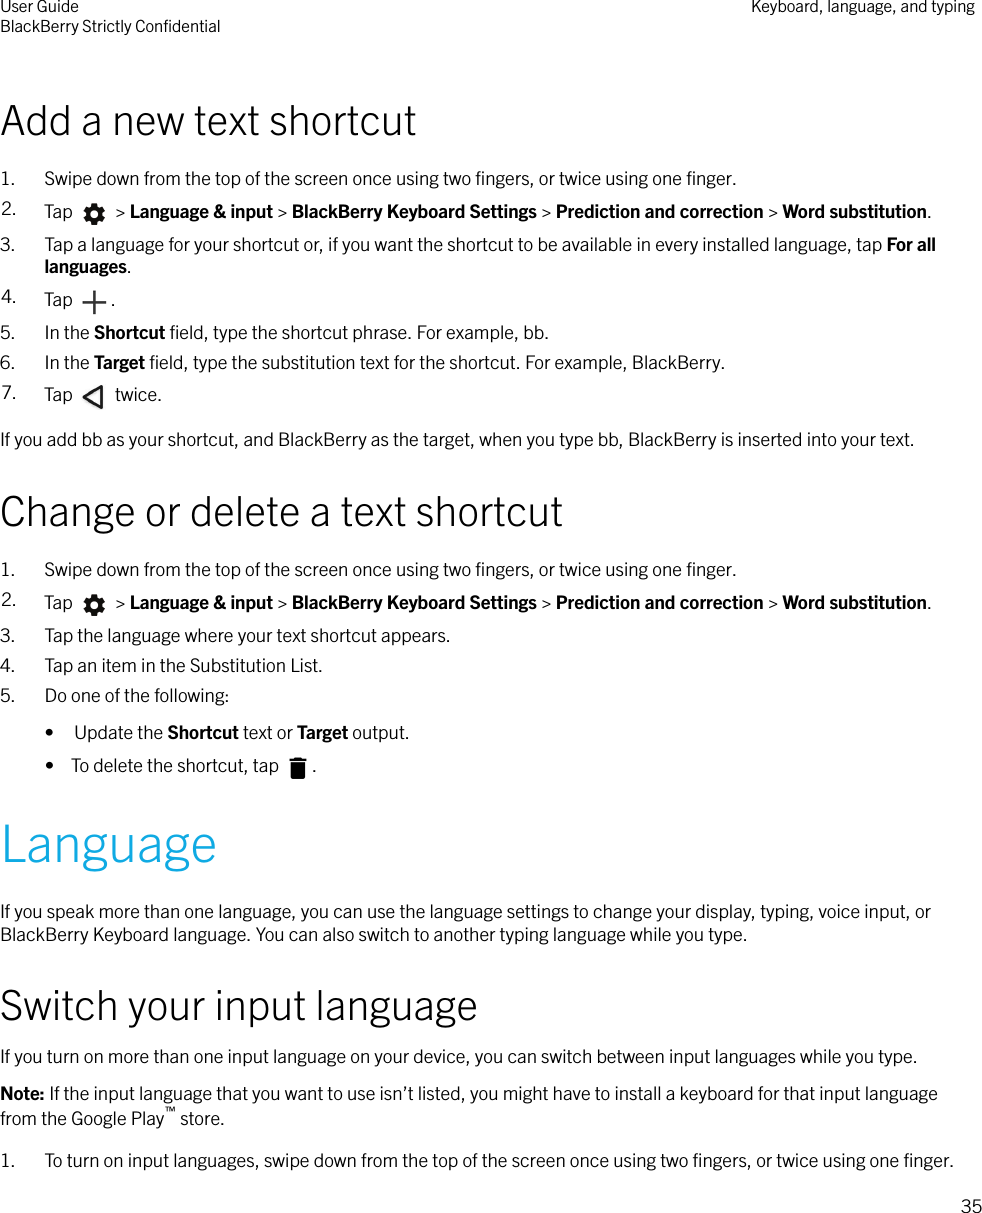 Add a new text shortcut1. Swipe down from the top of the screen once using two ﬁngers, or twice using one ﬁnger.2. Tap   &gt; Language &amp; input &gt; BlackBerry Keyboard Settings &gt; Prediction and correction &gt; Word substitution.3. Tap a language for your shortcut or, if you want the shortcut to be available in every installed language, tap For alllanguages.4. Tap  .5. In the Shortcut ﬁeld, type the shortcut phrase. For example, bb.6. In the Target ﬁeld, type the substitution text for the shortcut. For example, BlackBerry.7. Tap   twice.If you add bb as your shortcut, and BlackBerry as the target, when you type bb, BlackBerry is inserted into your text.Change or delete a text shortcut1. Swipe down from the top of the screen once using two ﬁngers, or twice using one ﬁnger.2. Tap   &gt; Language &amp; input &gt; BlackBerry Keyboard Settings &gt; Prediction and correction &gt; Word substitution.3. Tap the language where your text shortcut appears.4. Tap an item in the Substitution List.5. Do one of the following:• Update the Shortcut text or Target output.•  To delete the shortcut, tap  .LanguageIf you speak more than one language, you can use the language settings to change your display, typing, voice input, orBlackBerry Keyboard language. You can also switch to another typing language while you type.Switch your input languageIf you turn on more than one input language on your device, you can switch between input languages while you type.Note: If the input language that you want to use isn’t listed, you might have to install a keyboard for that input languagefrom the Google Play™ store.1. To turn on input languages, swipe down from the top of the screen once using two ﬁngers, or twice using one ﬁnger.User GuideBlackBerry Strictly ConﬁdentialKeyboard, language, and typing35